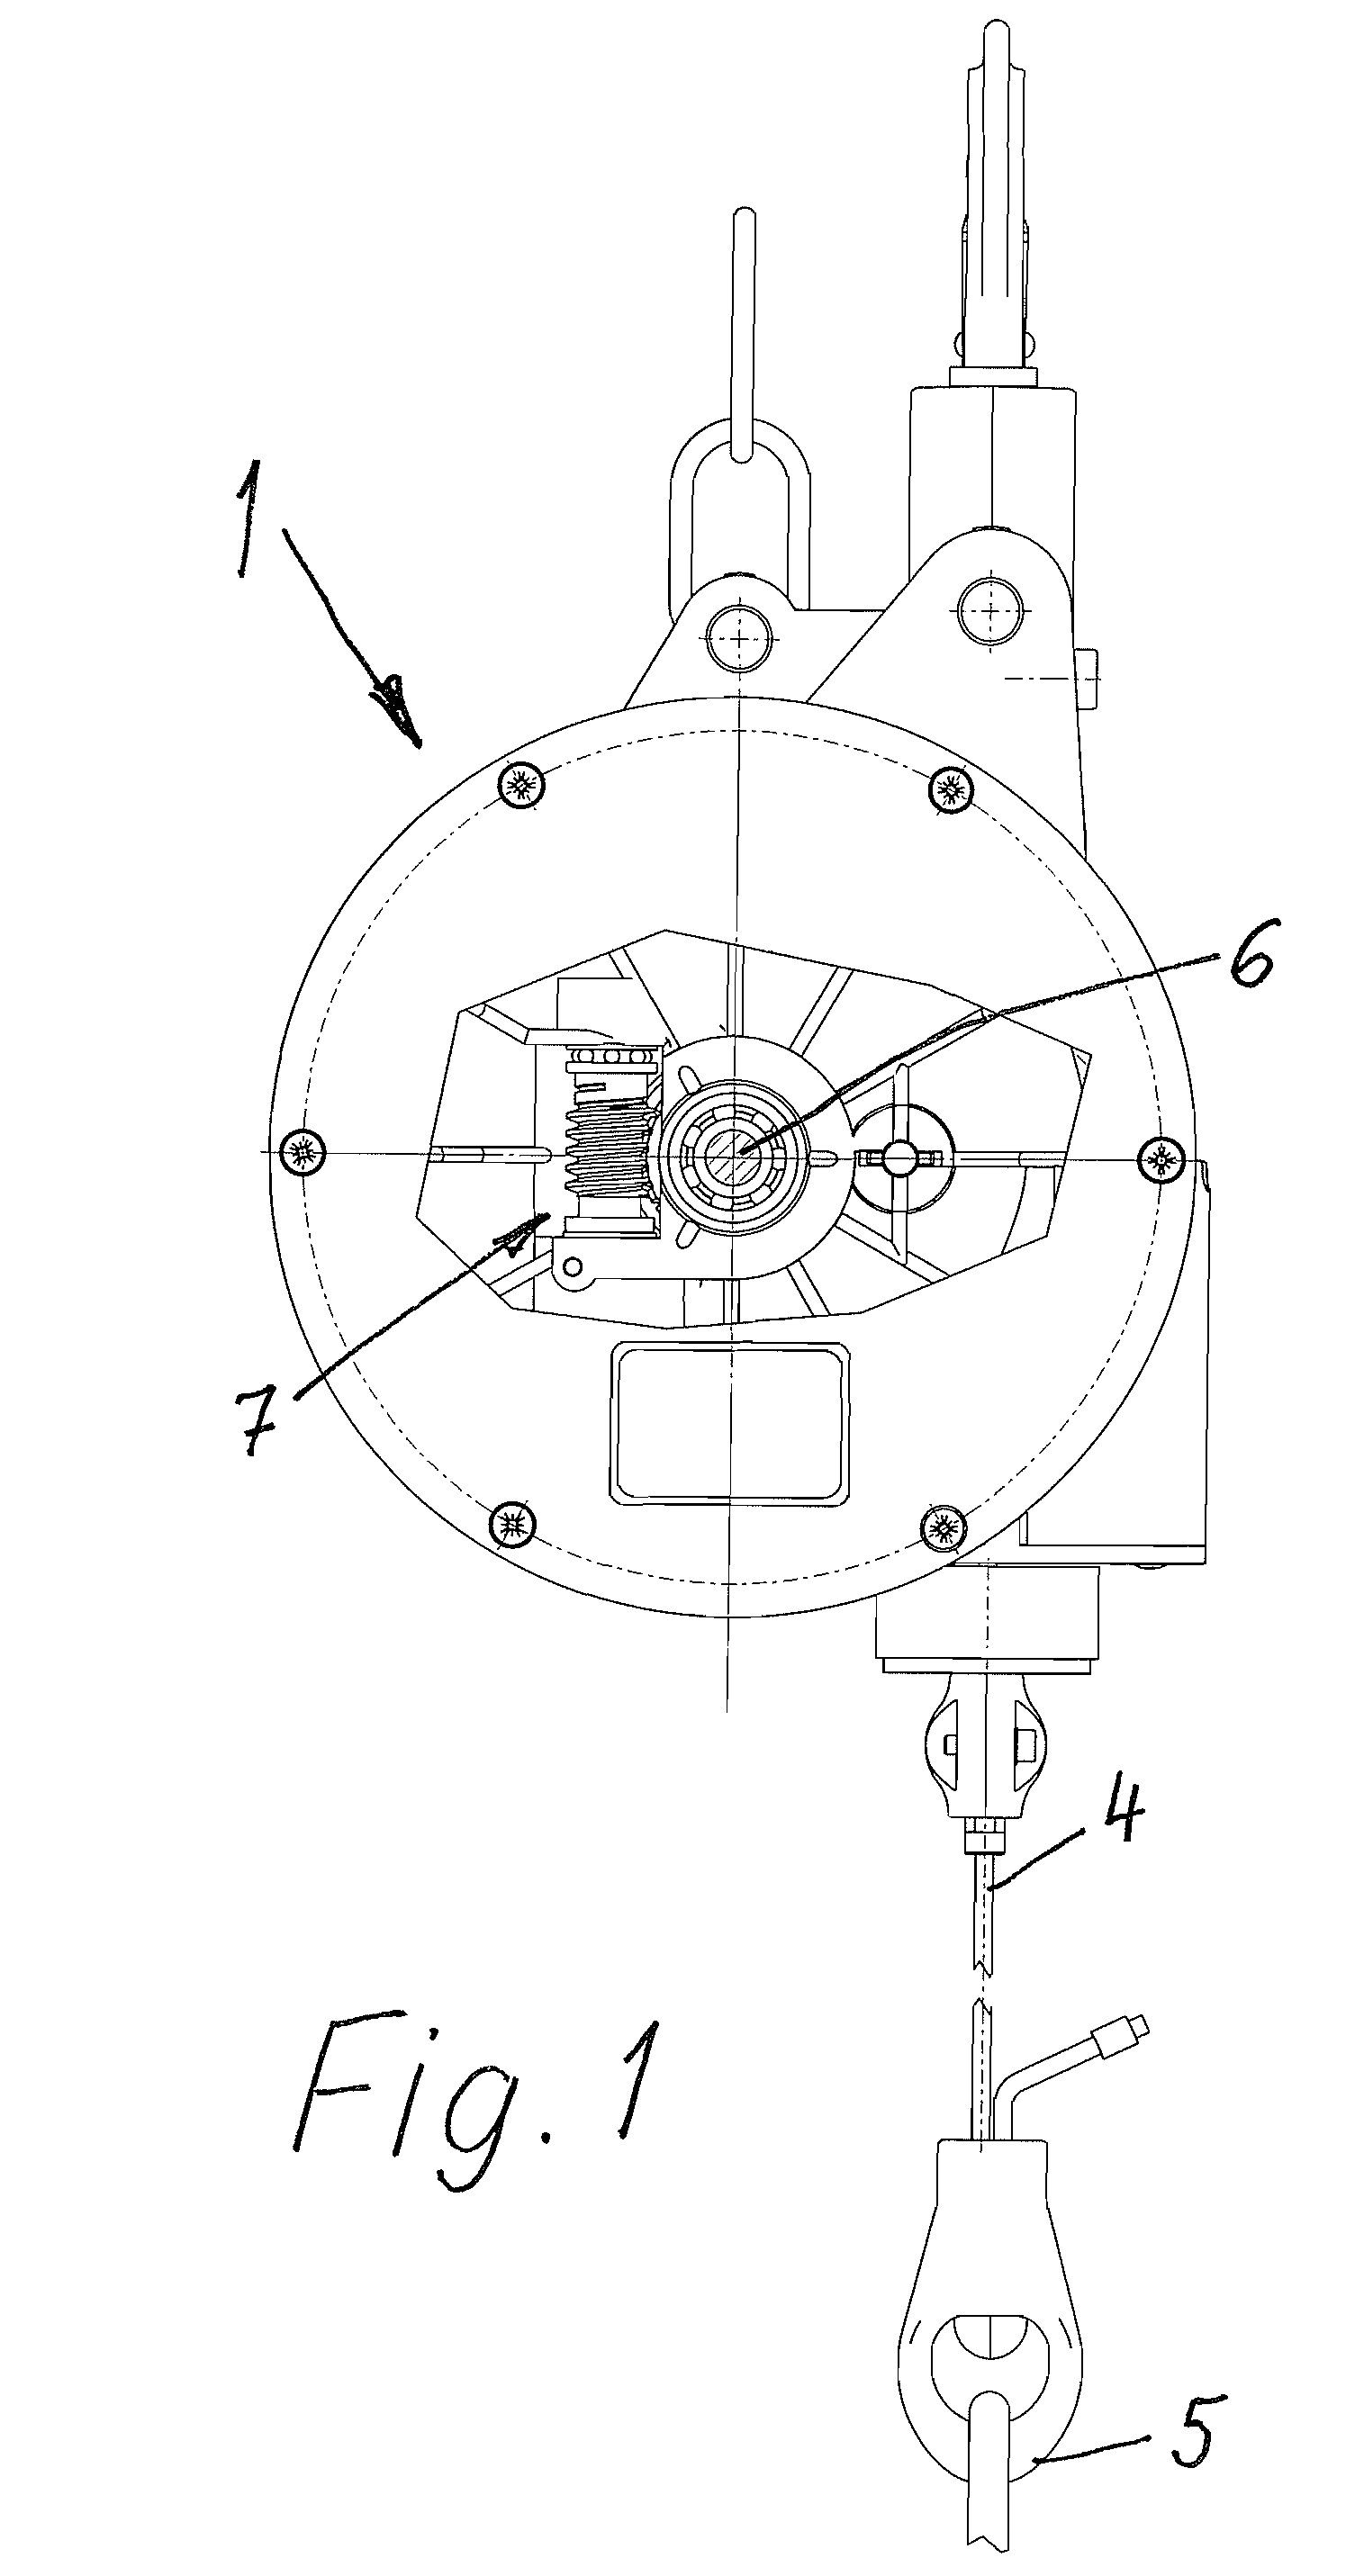 Device for compensating the weight of a suspended load